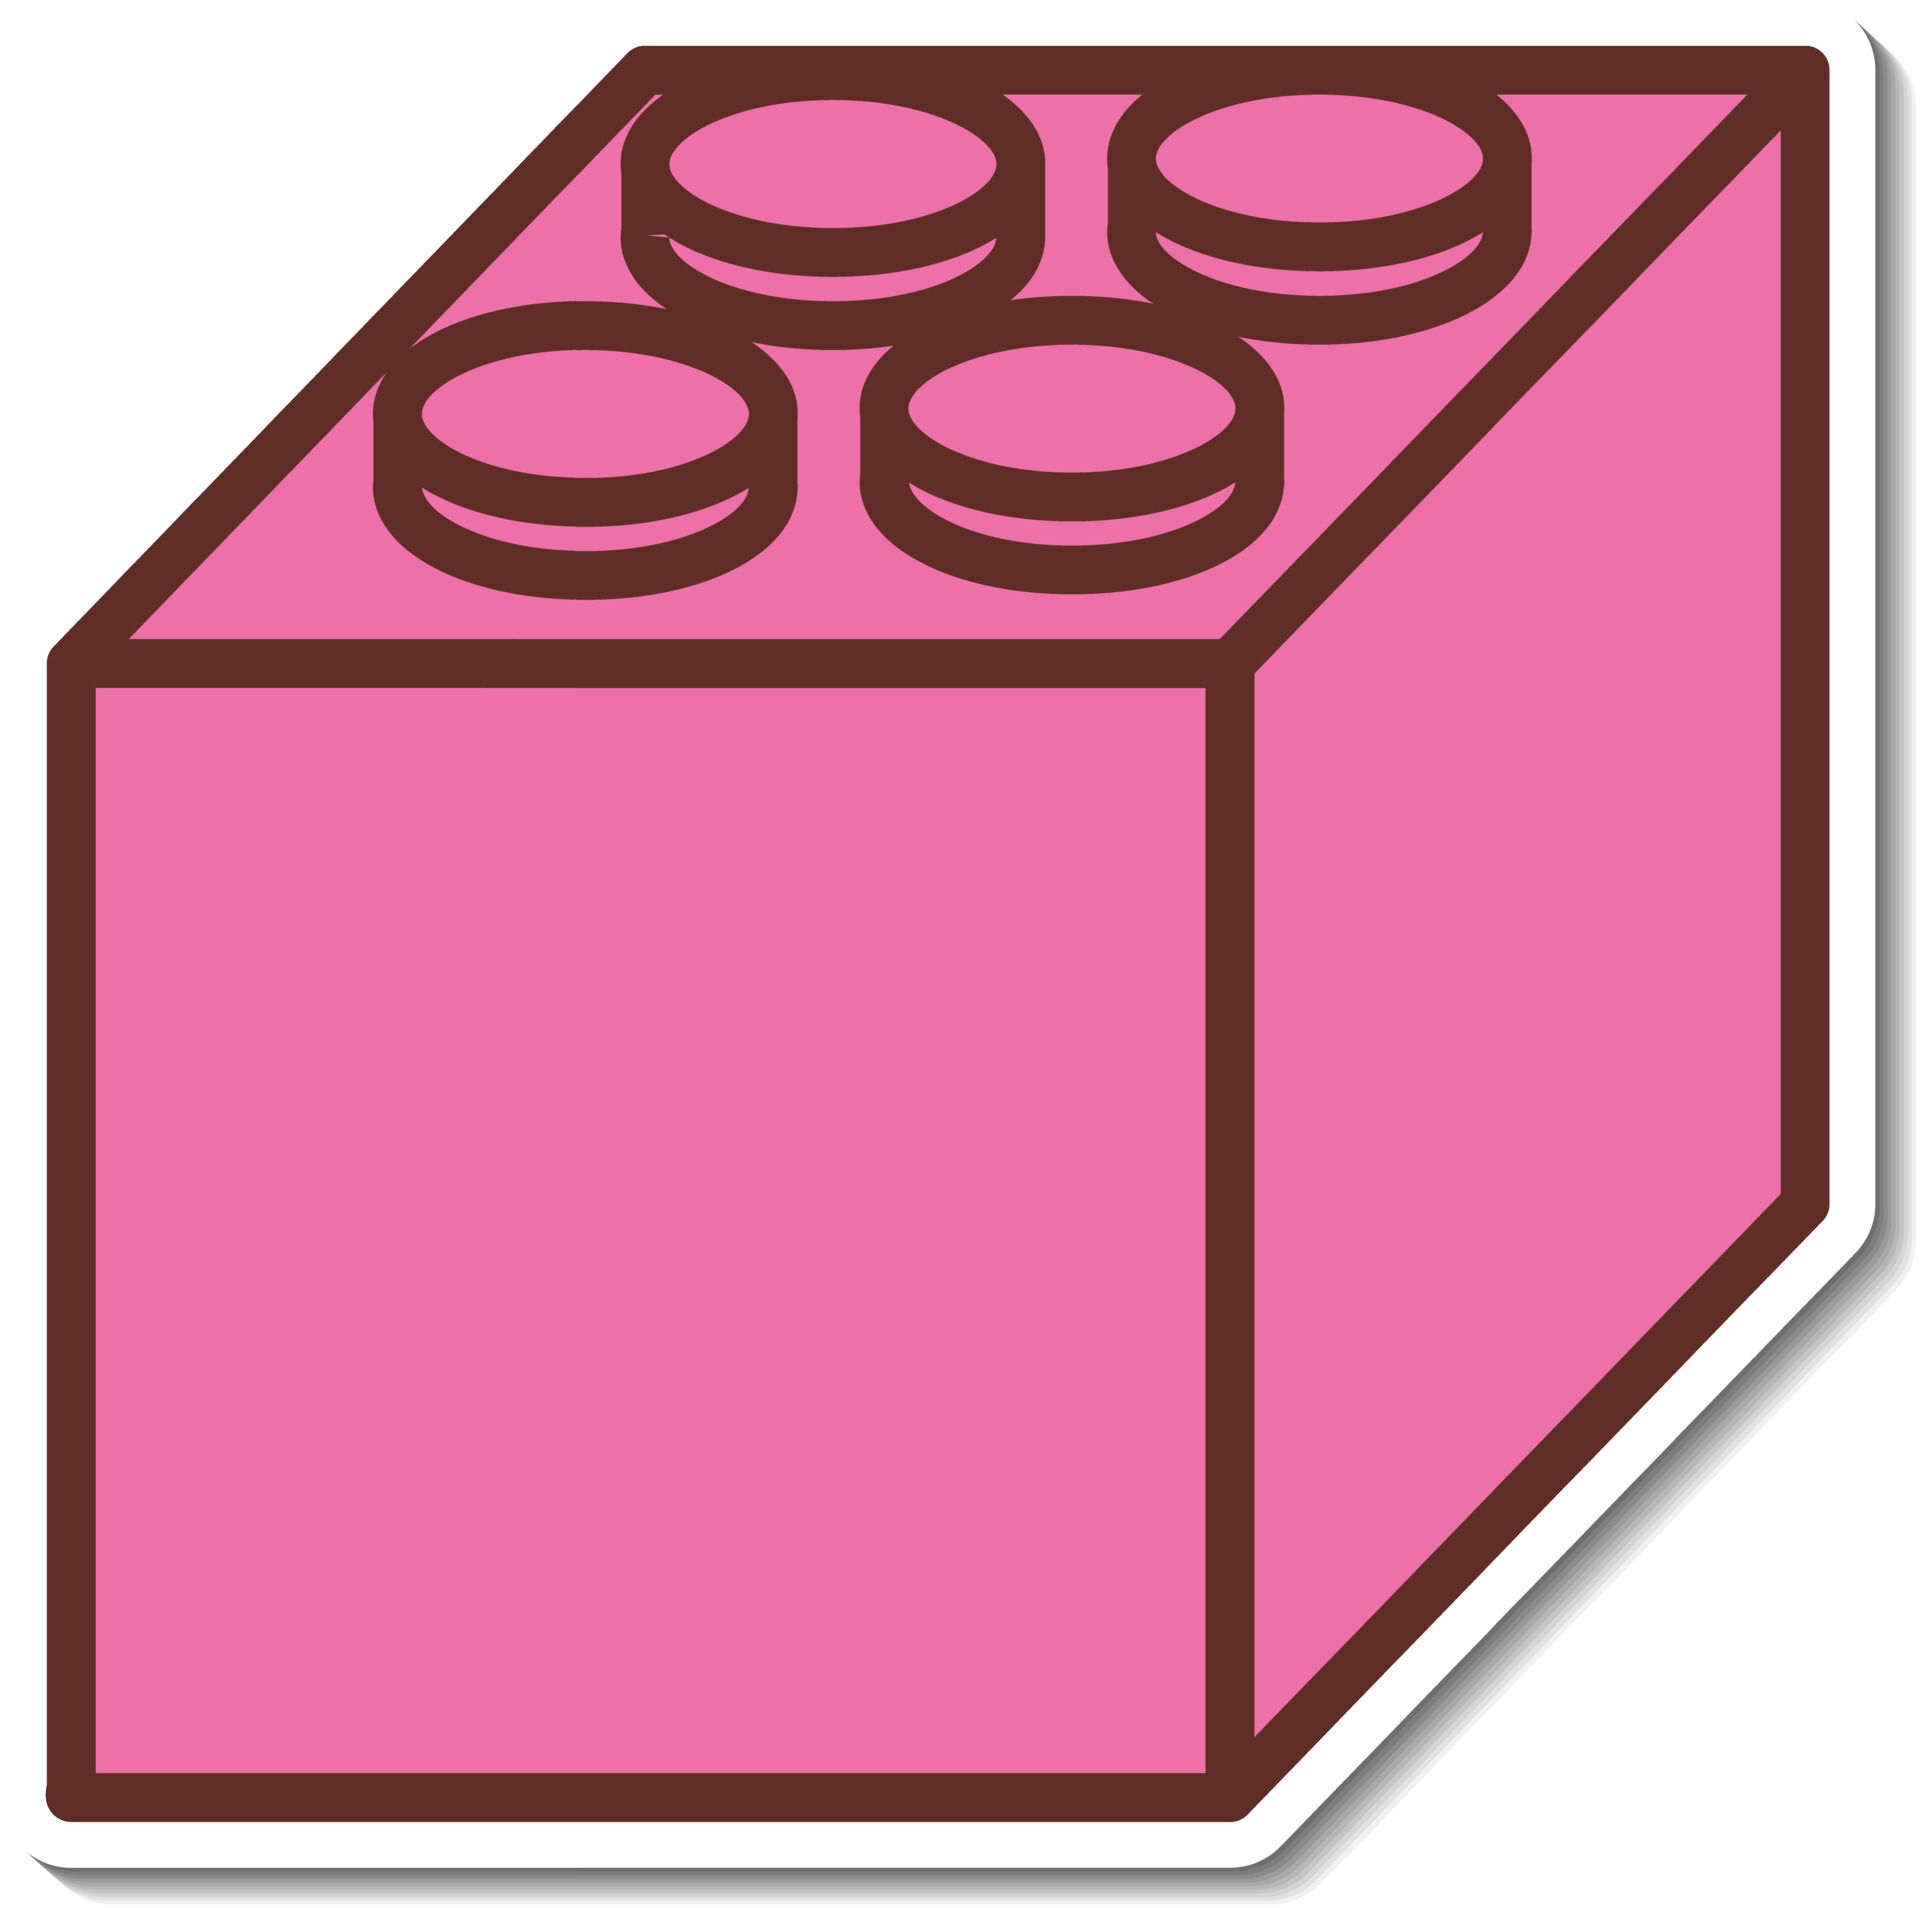 https://static.vecteezy.com/system/resources/previews/002/896/354/original/sticker-design-with-pink-lego-block-isolated-free-vector.jpg